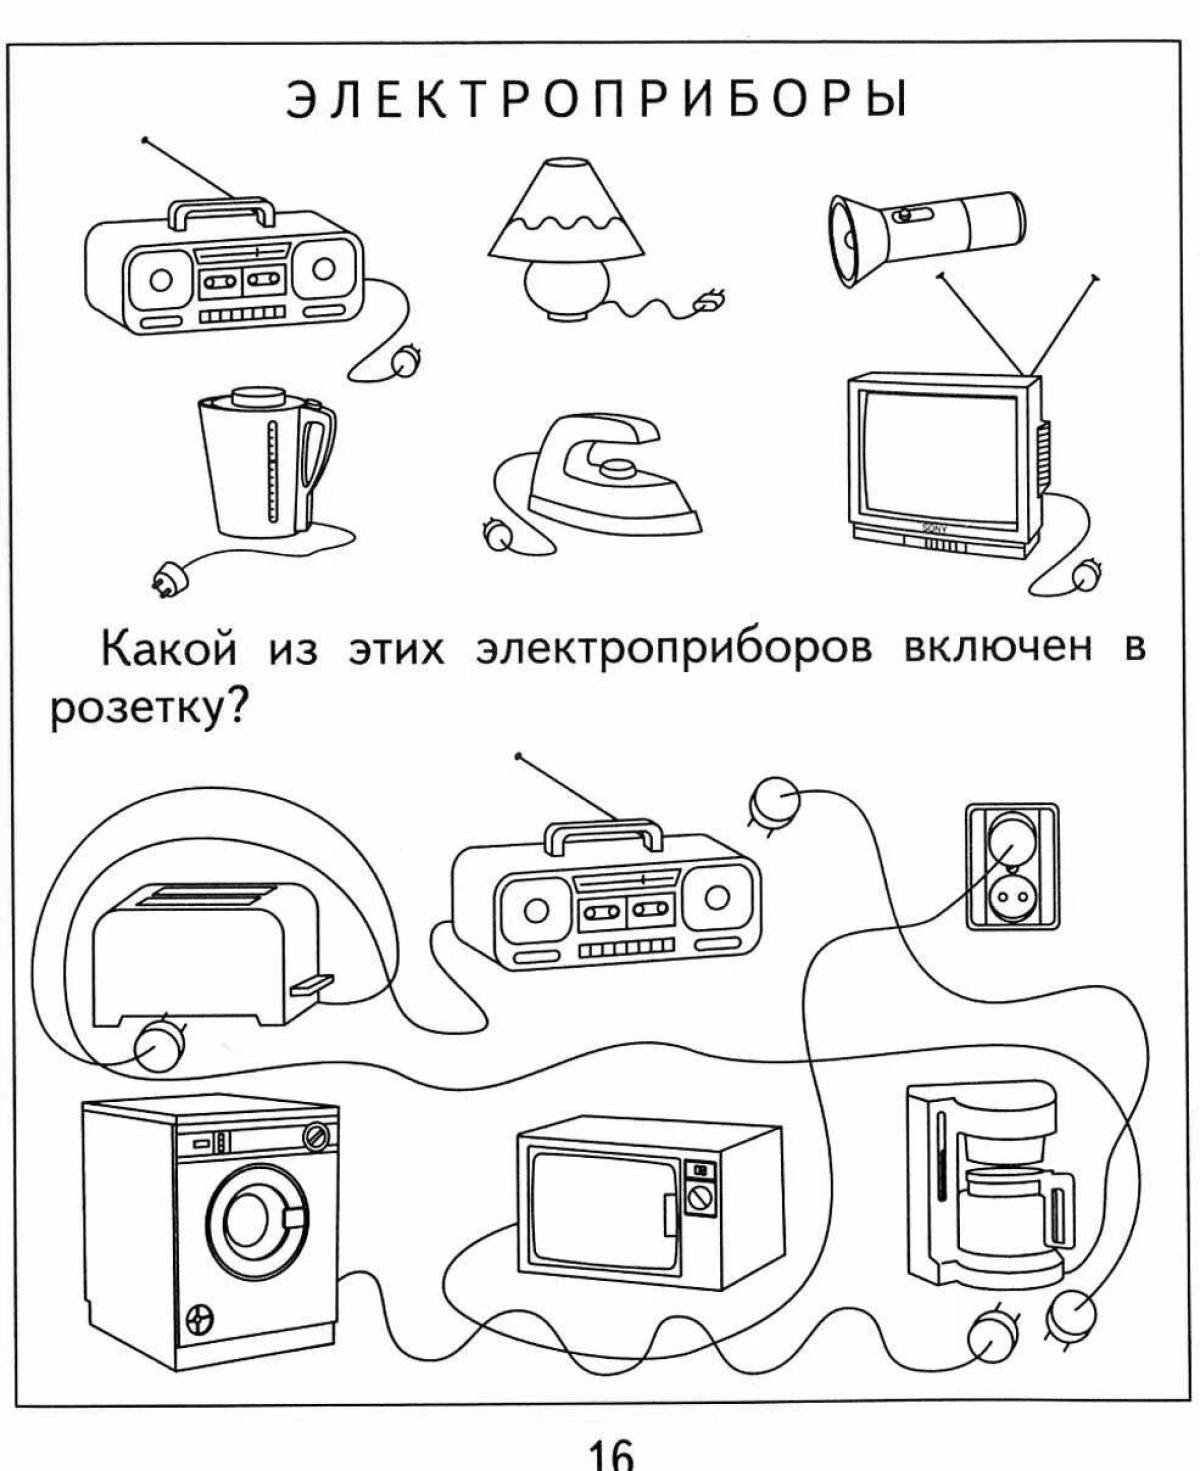 Fabulous electrical devices coloring book